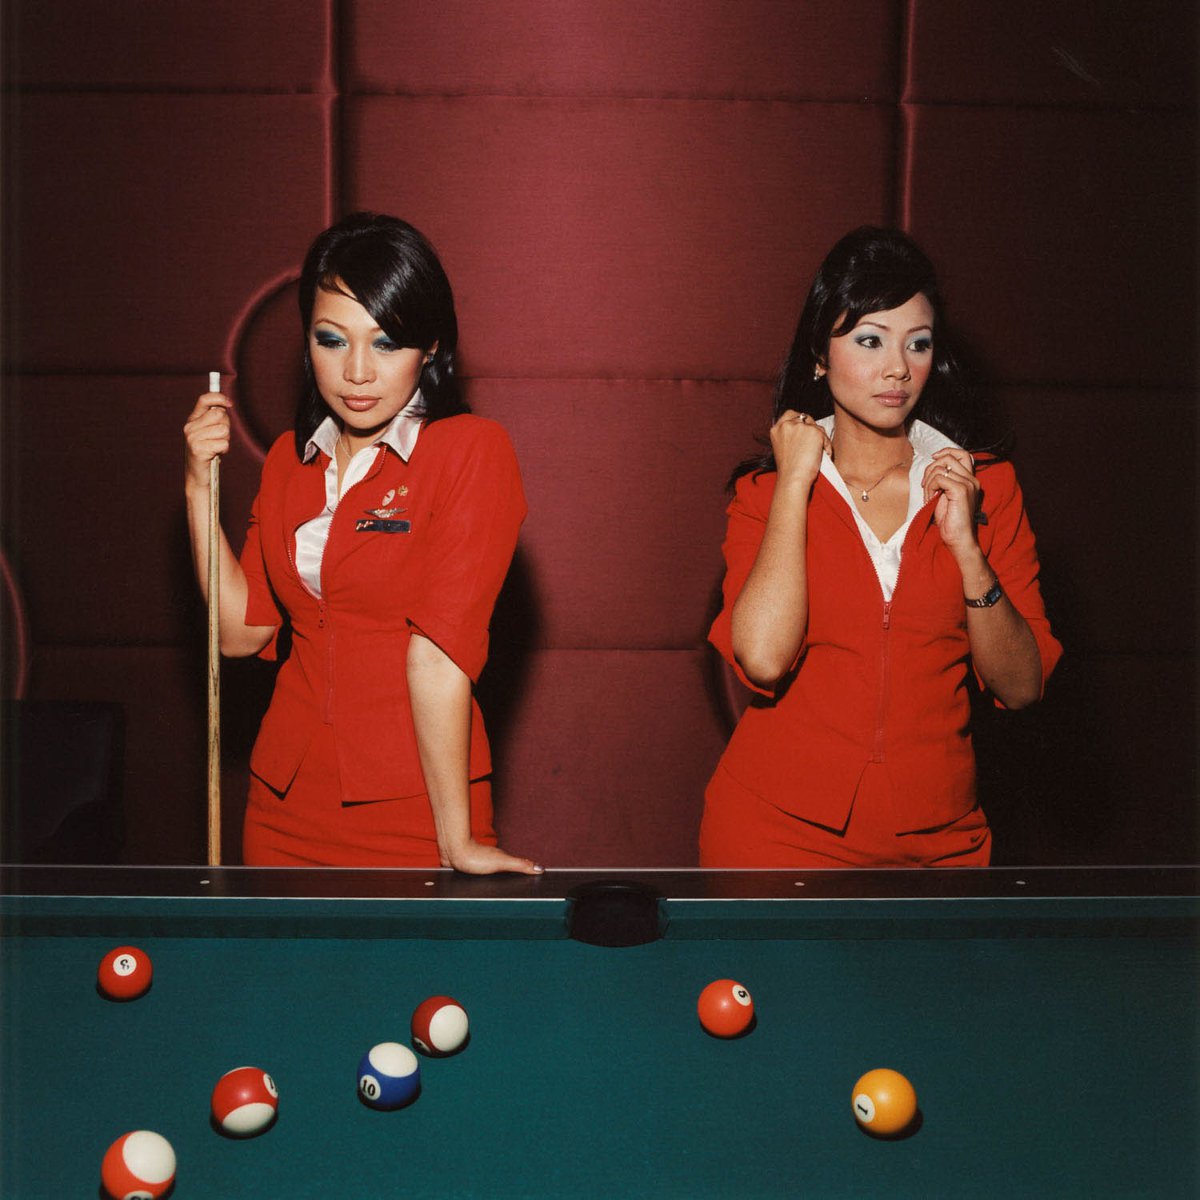 Untitled (Lily and Azriza, Air Asia), 2006 by Brian Finke